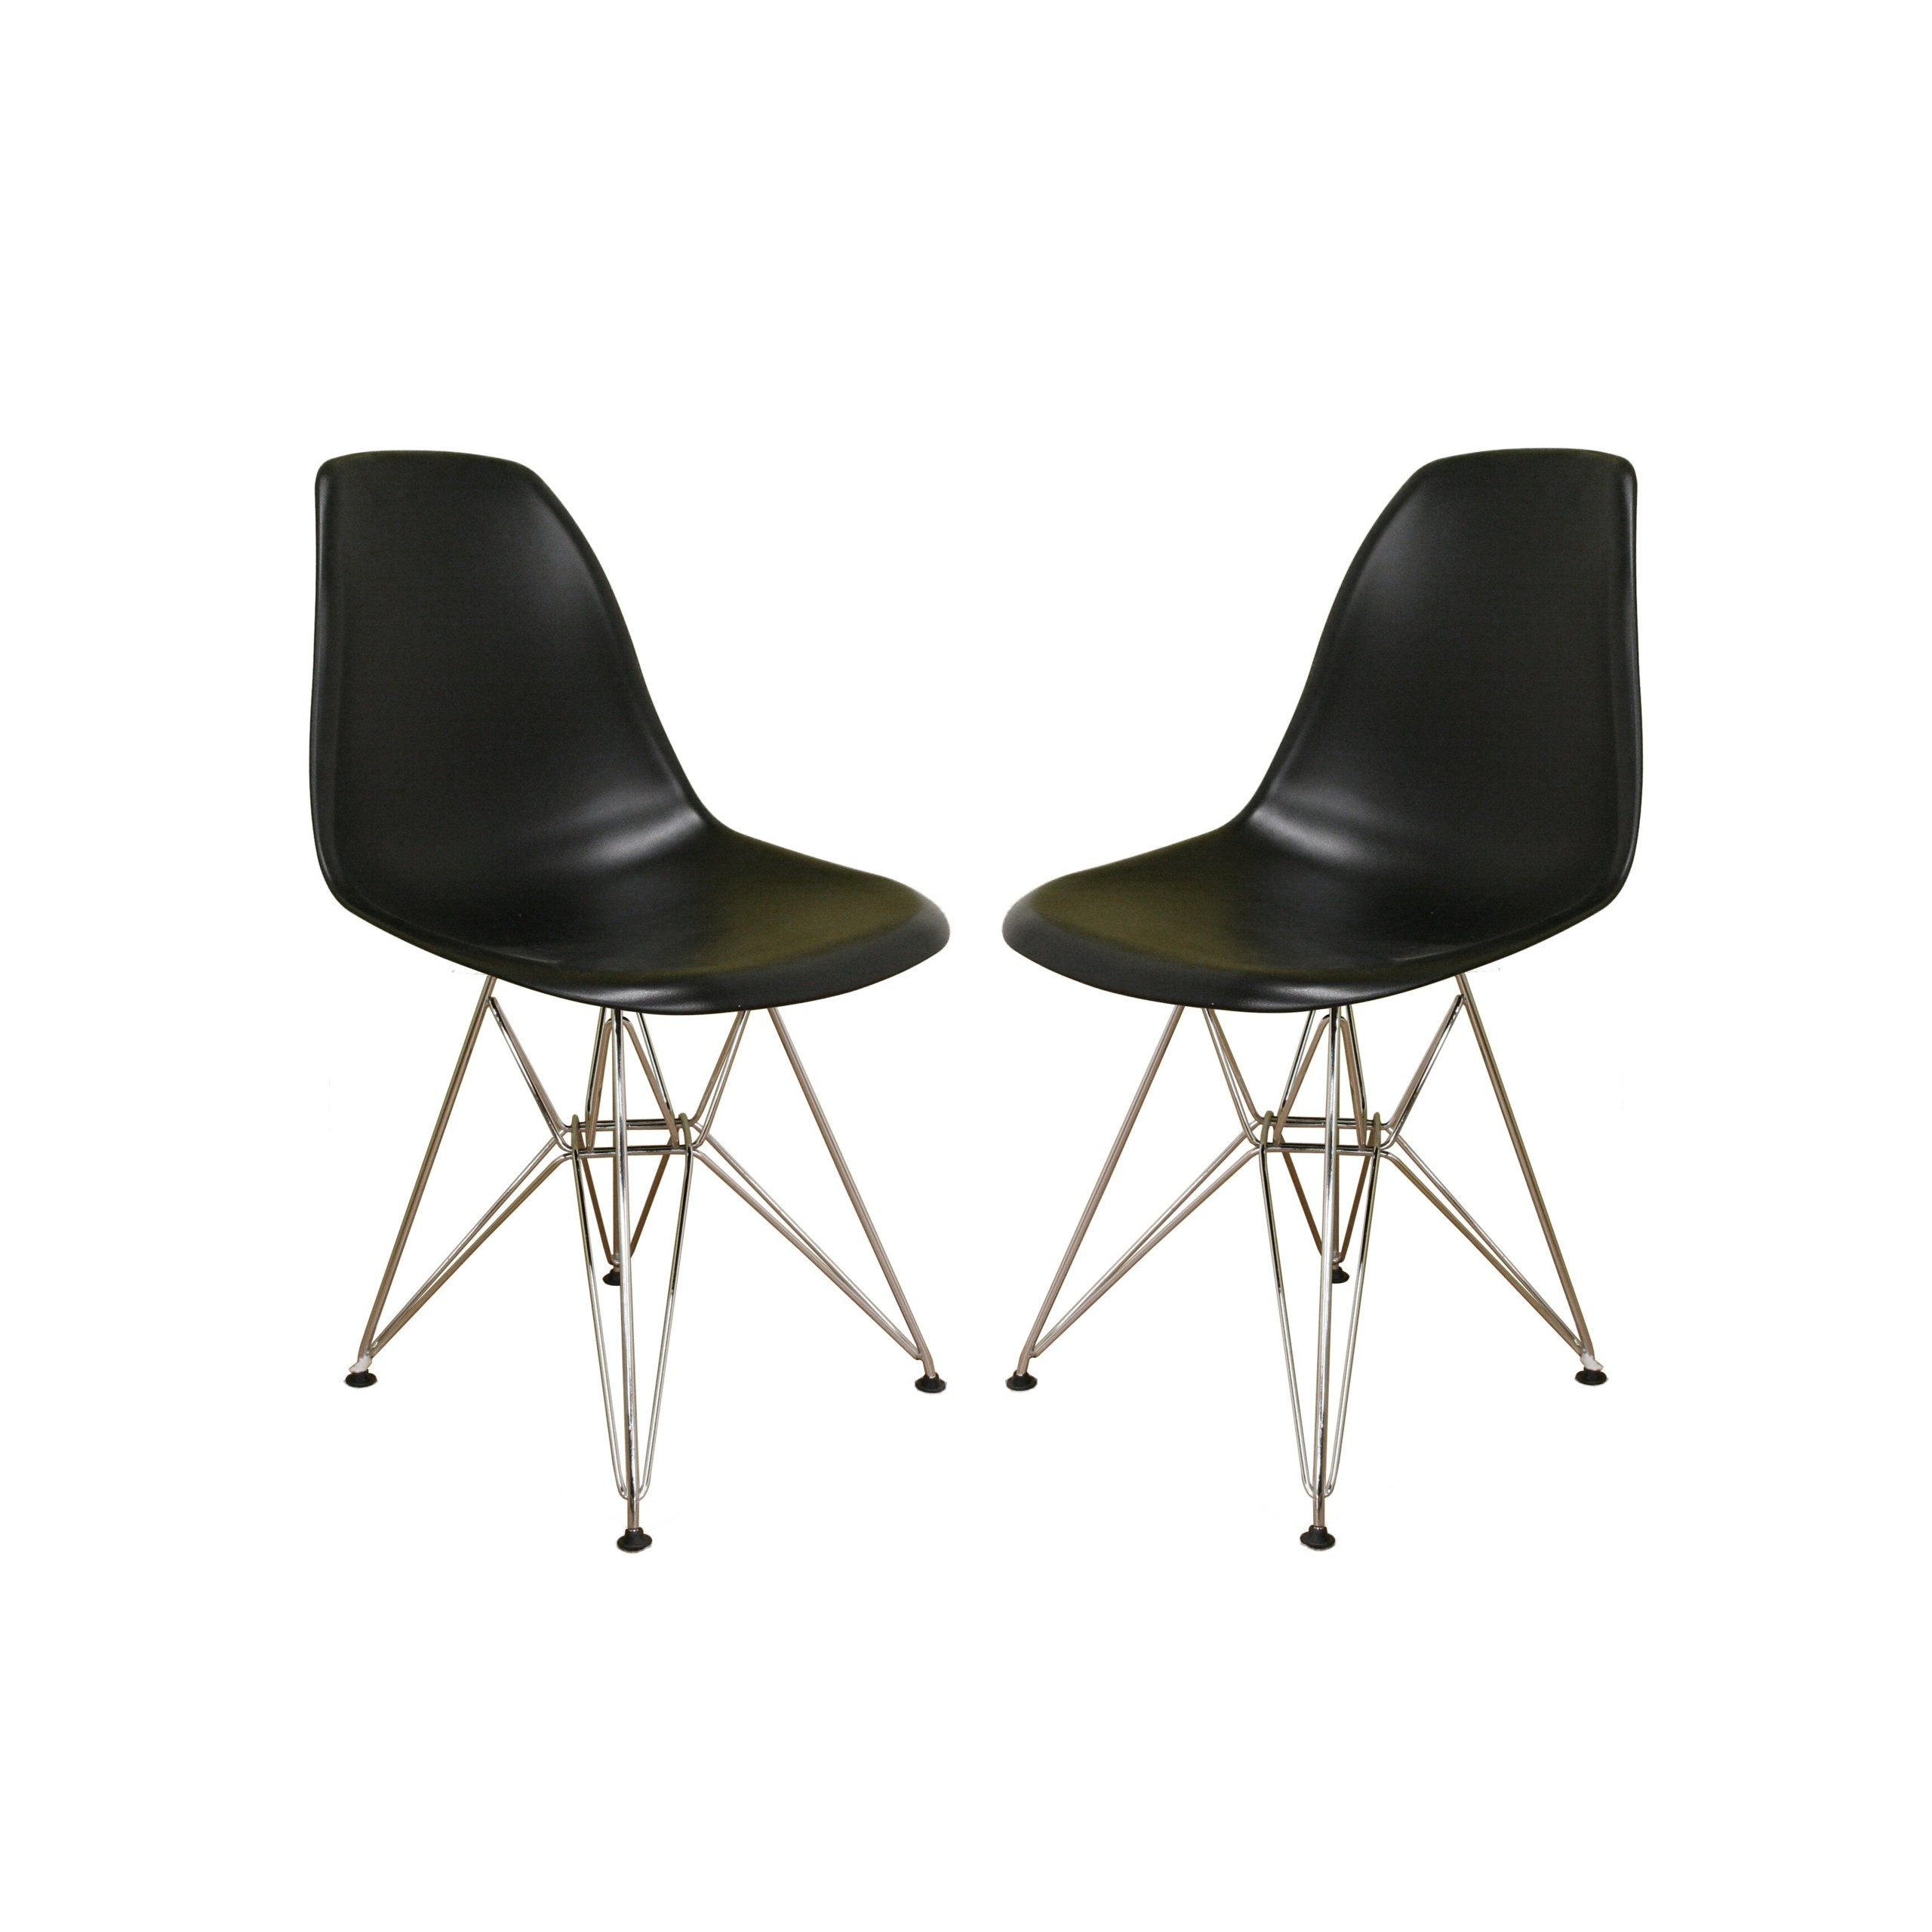 Ronnie wire base black chairs set of 2